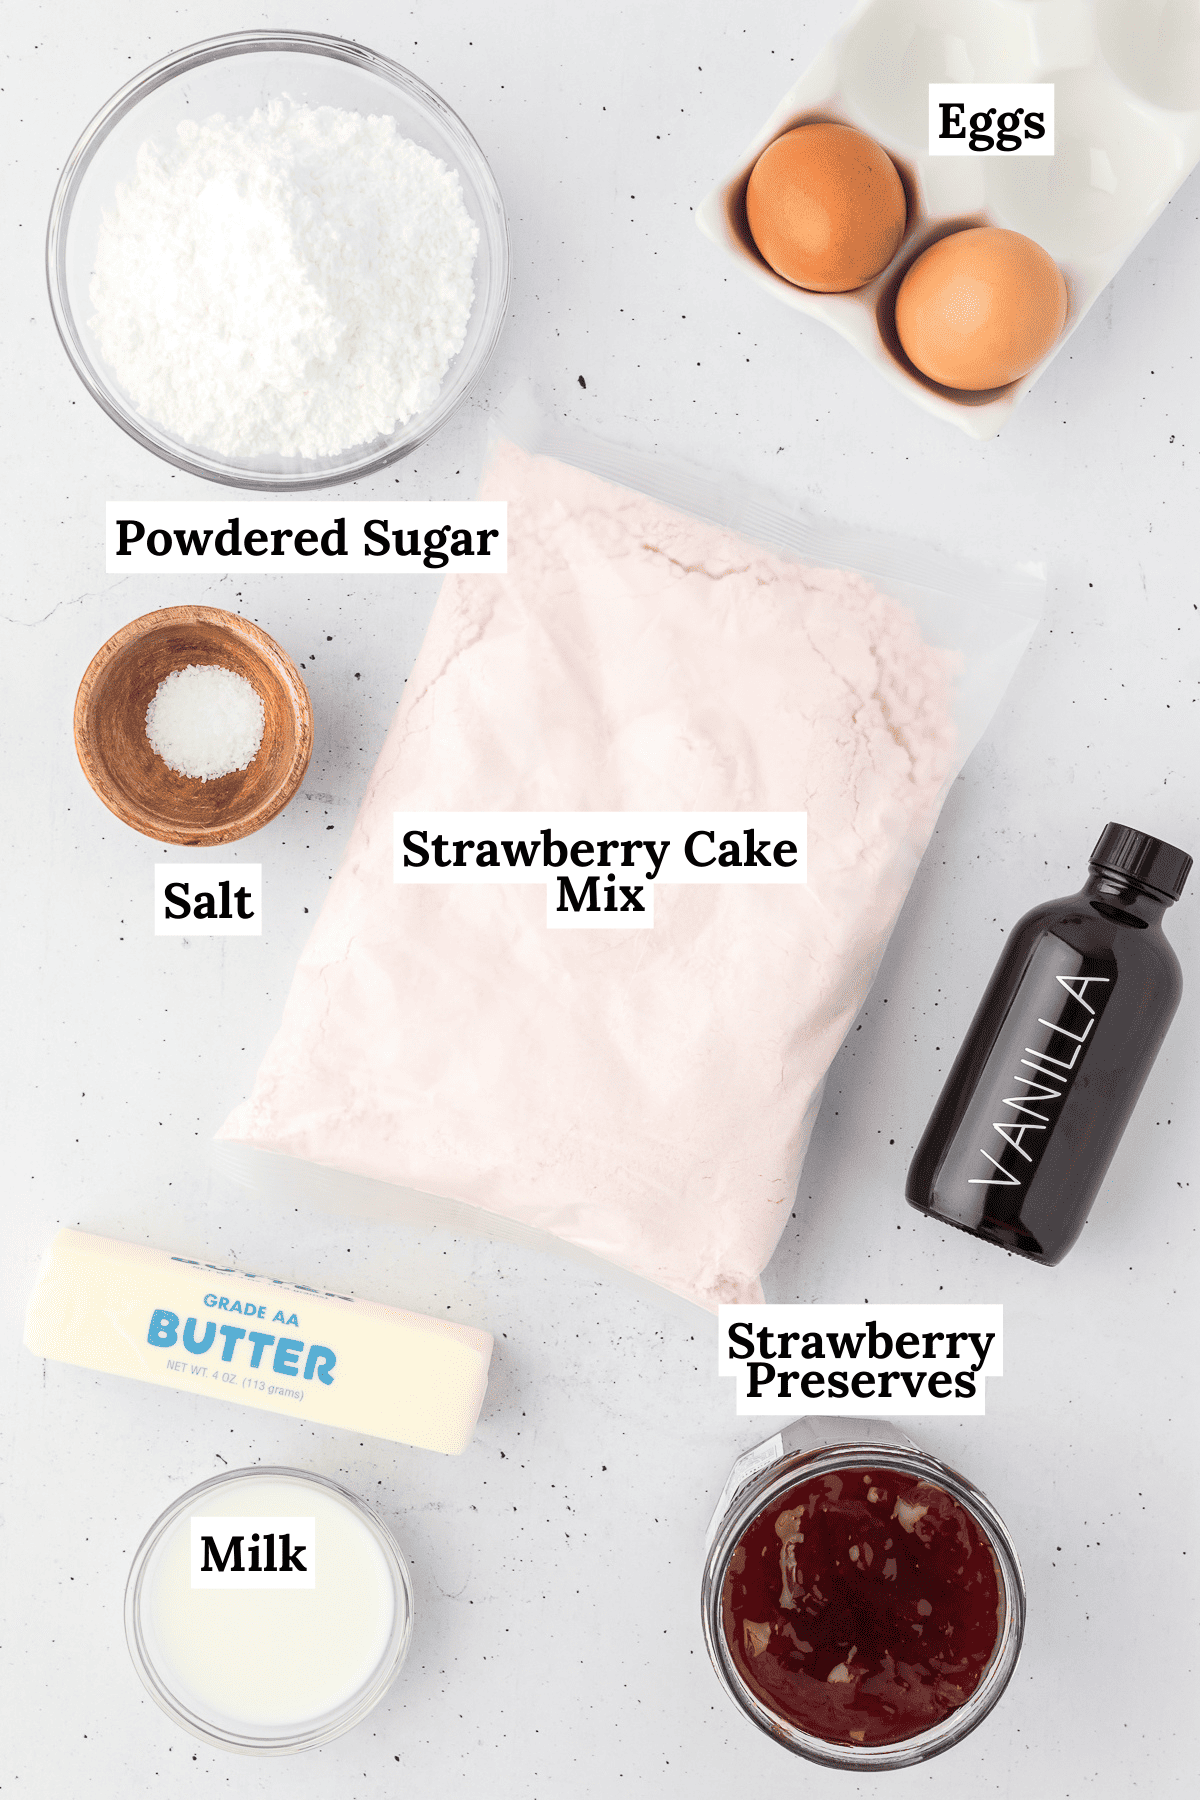 The ingredients for strawberry brownies laid out on a counter including eggs, powdered sugar, salt, strawberry cake mix, vanilla, strawberry preserves, butter and milk